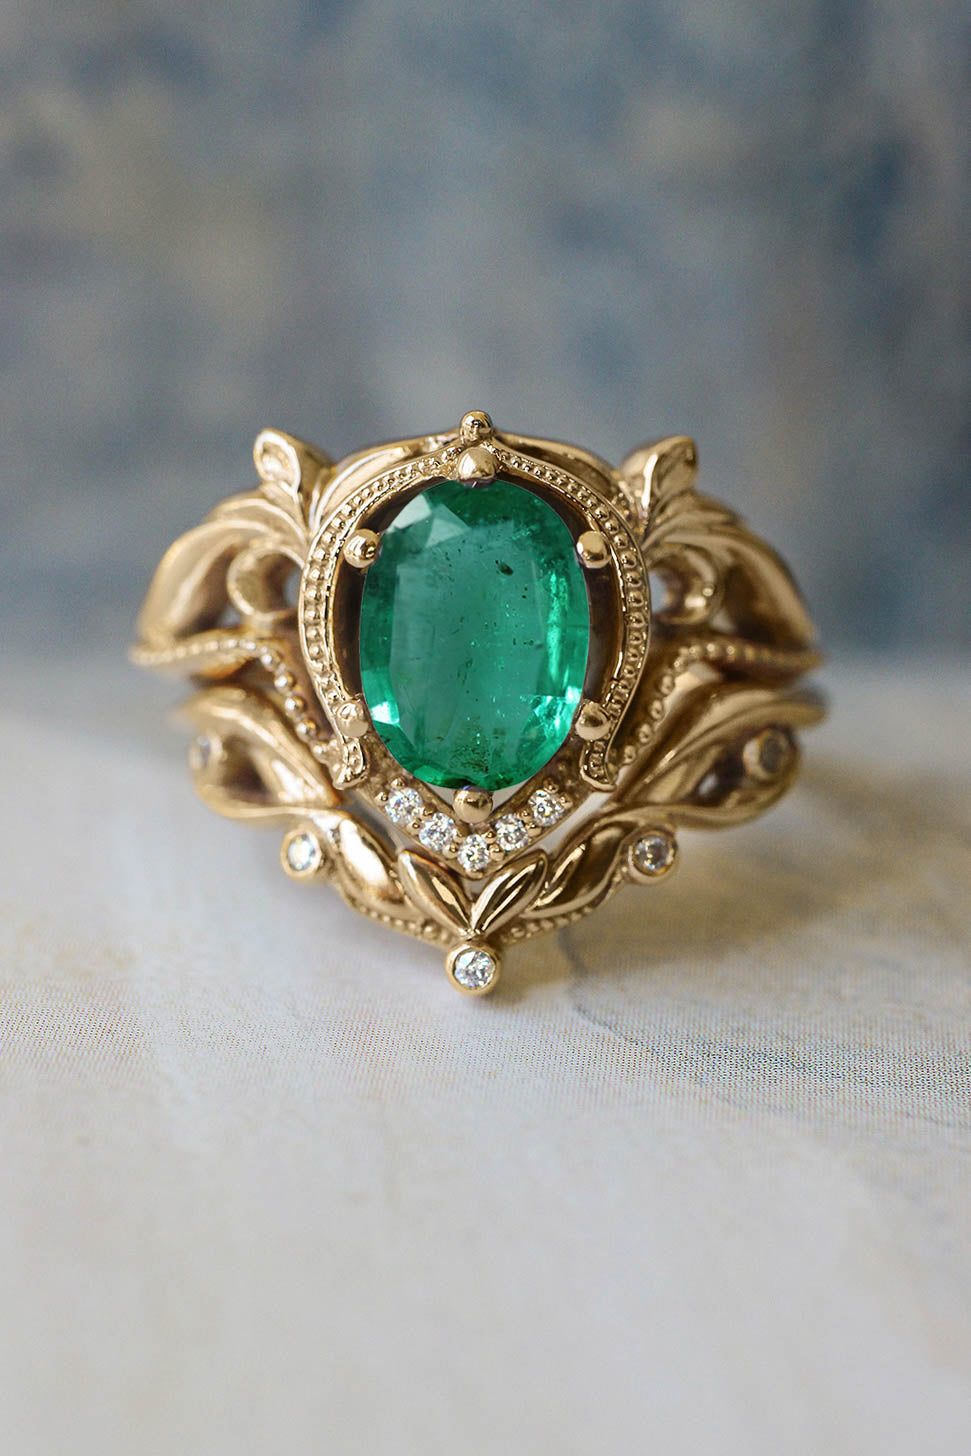 Art nouveau bridal ring set with natural emerald / Lida oval - Eden Garden Jewelry™